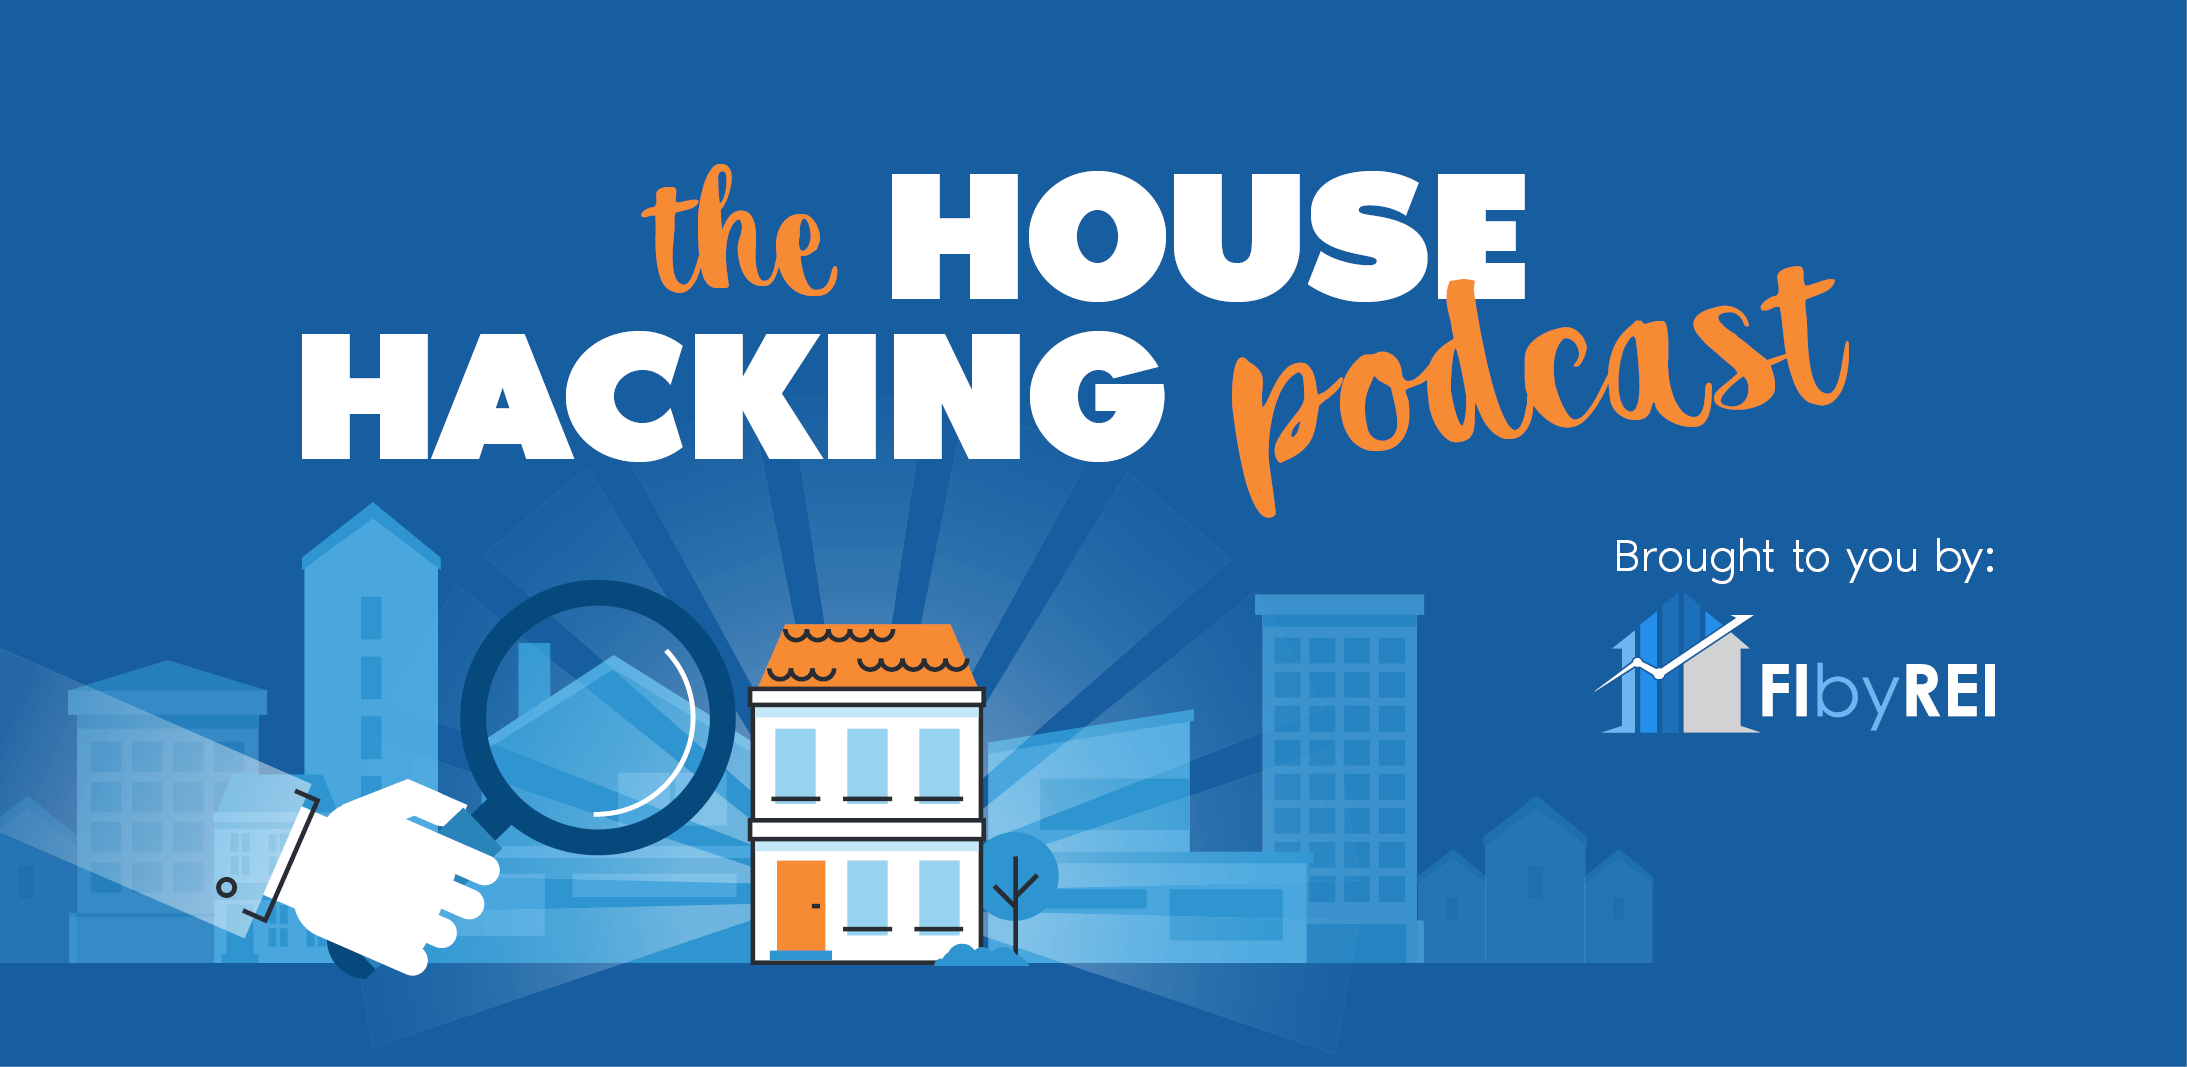 Promotional graphic for 'the house hacking podcast,' featuring a stylized illustration with a vibrant cityscape, a magnifying glass focusing on a house, and the sponsoring entity 'fi by rei.'.